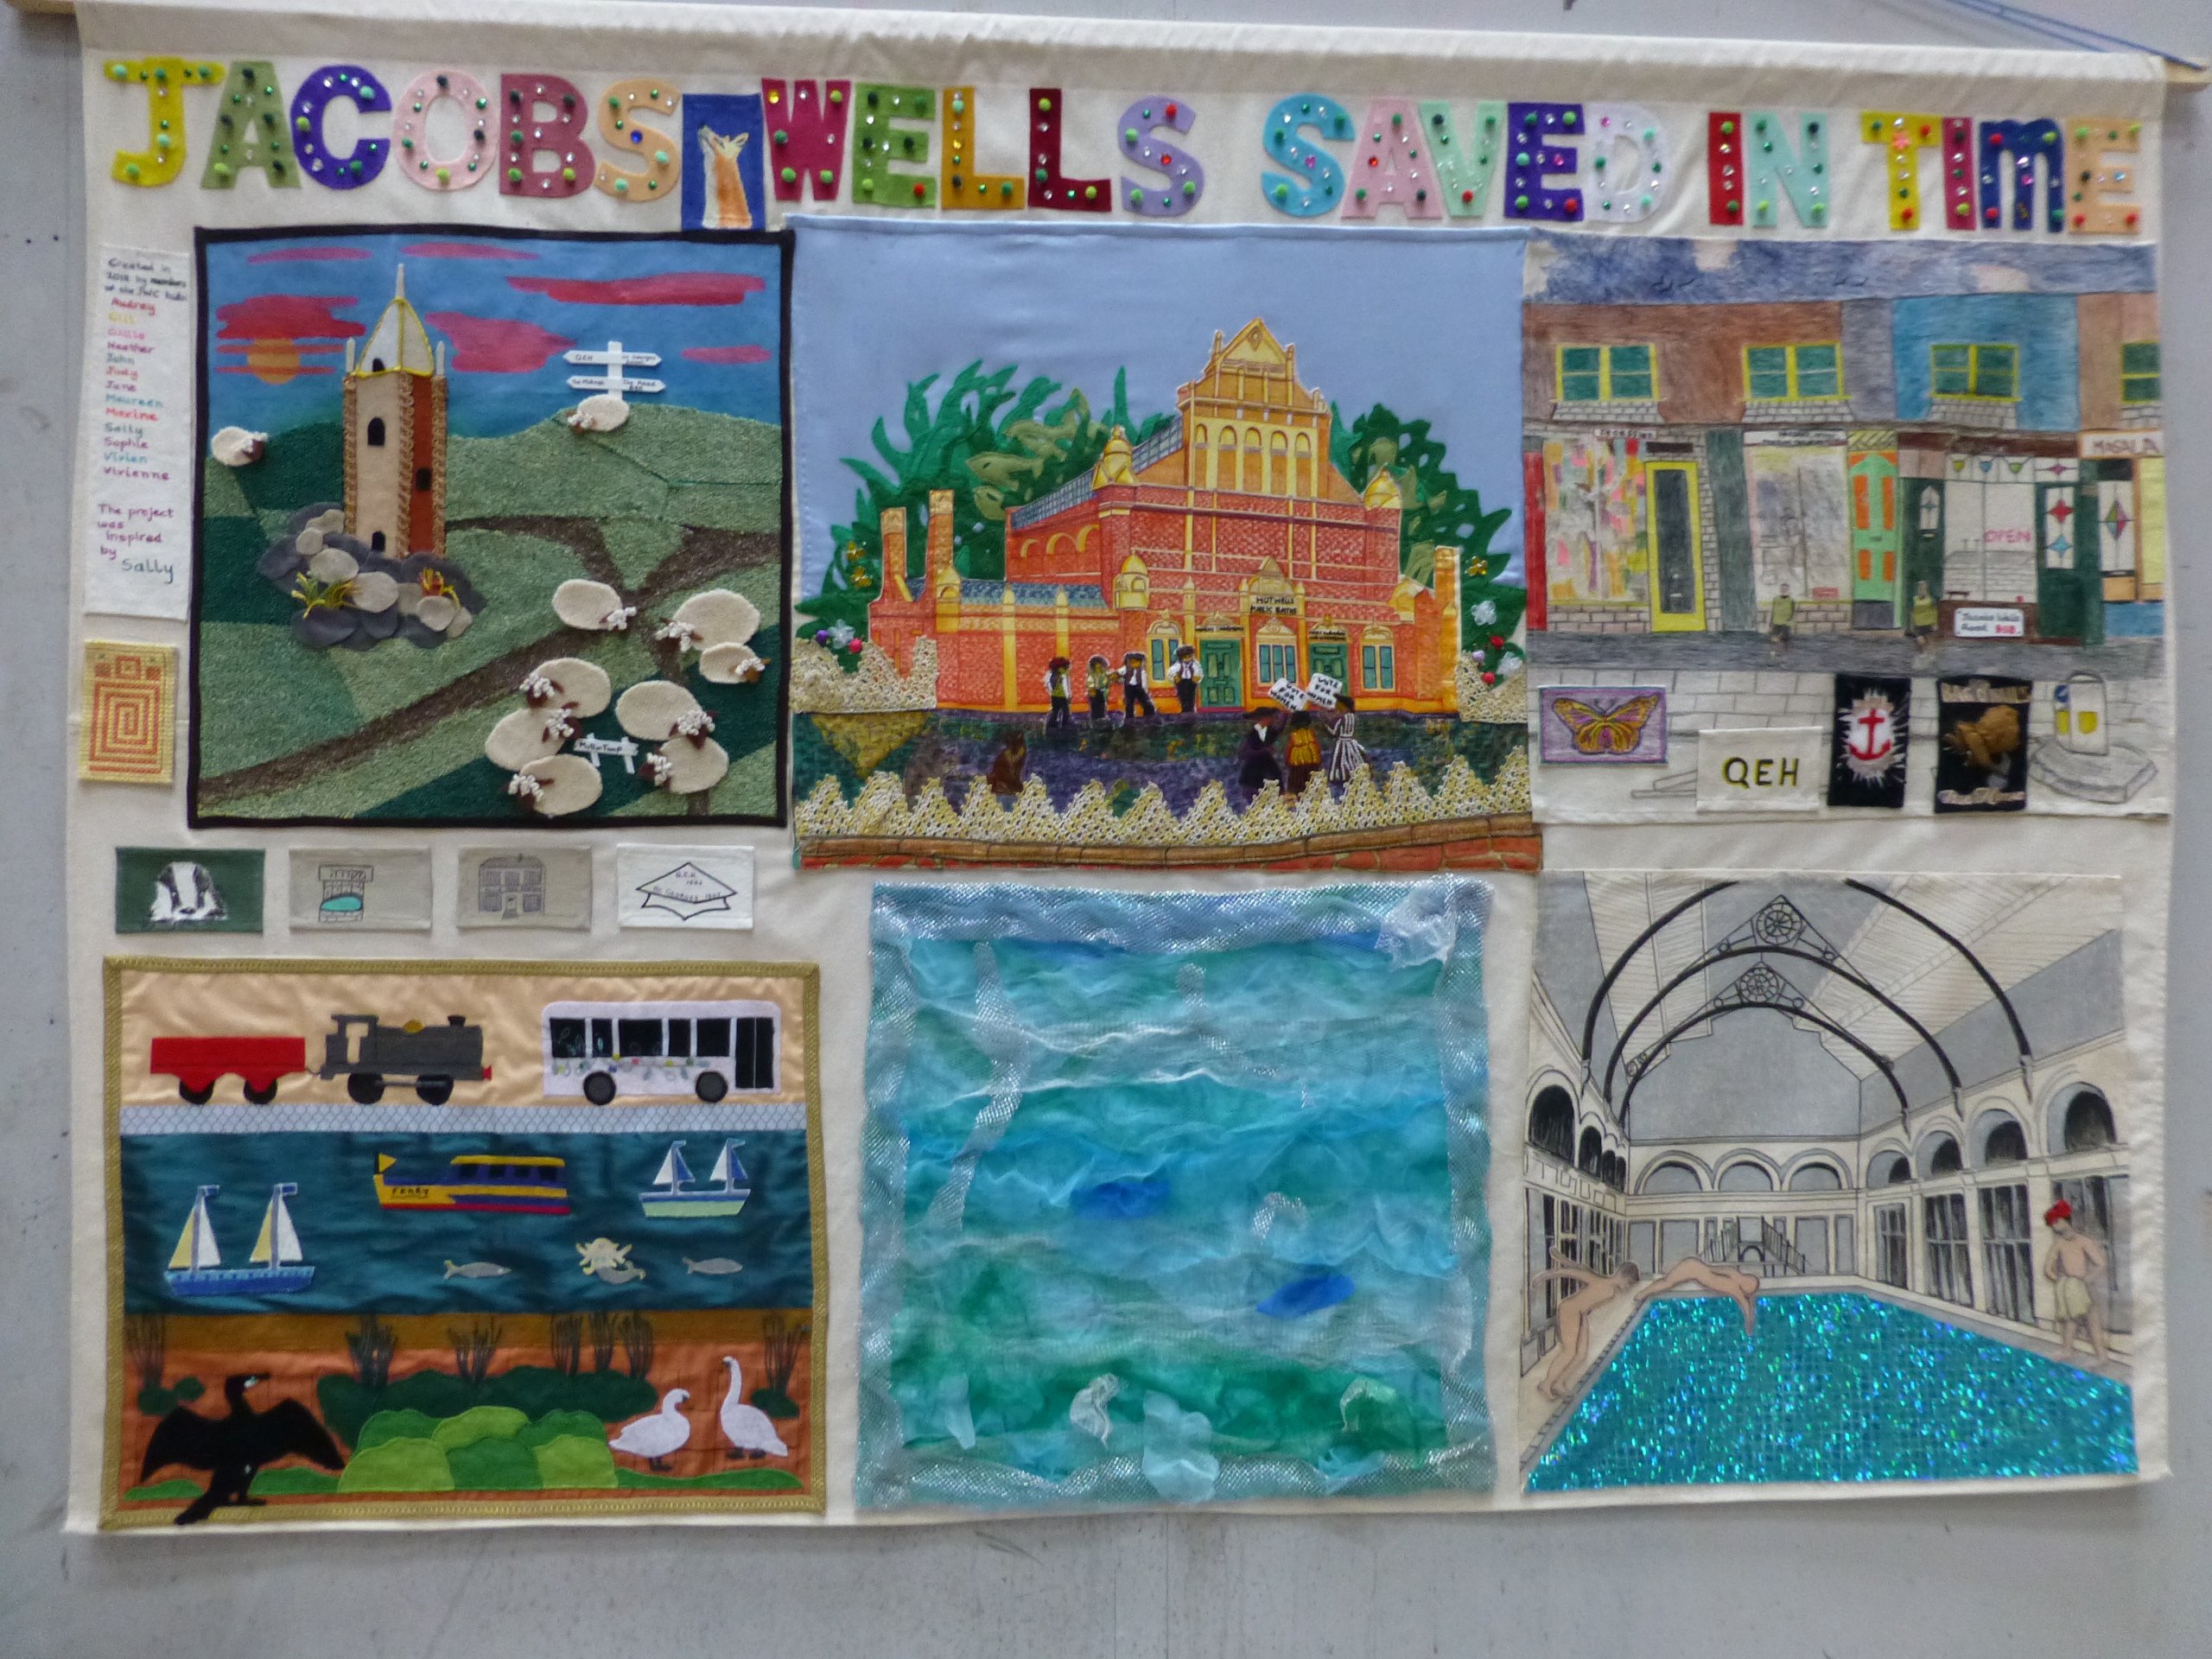 Banner with pictures of the baths made out of fabric, entitled “Jacobs Wellssaved in time”